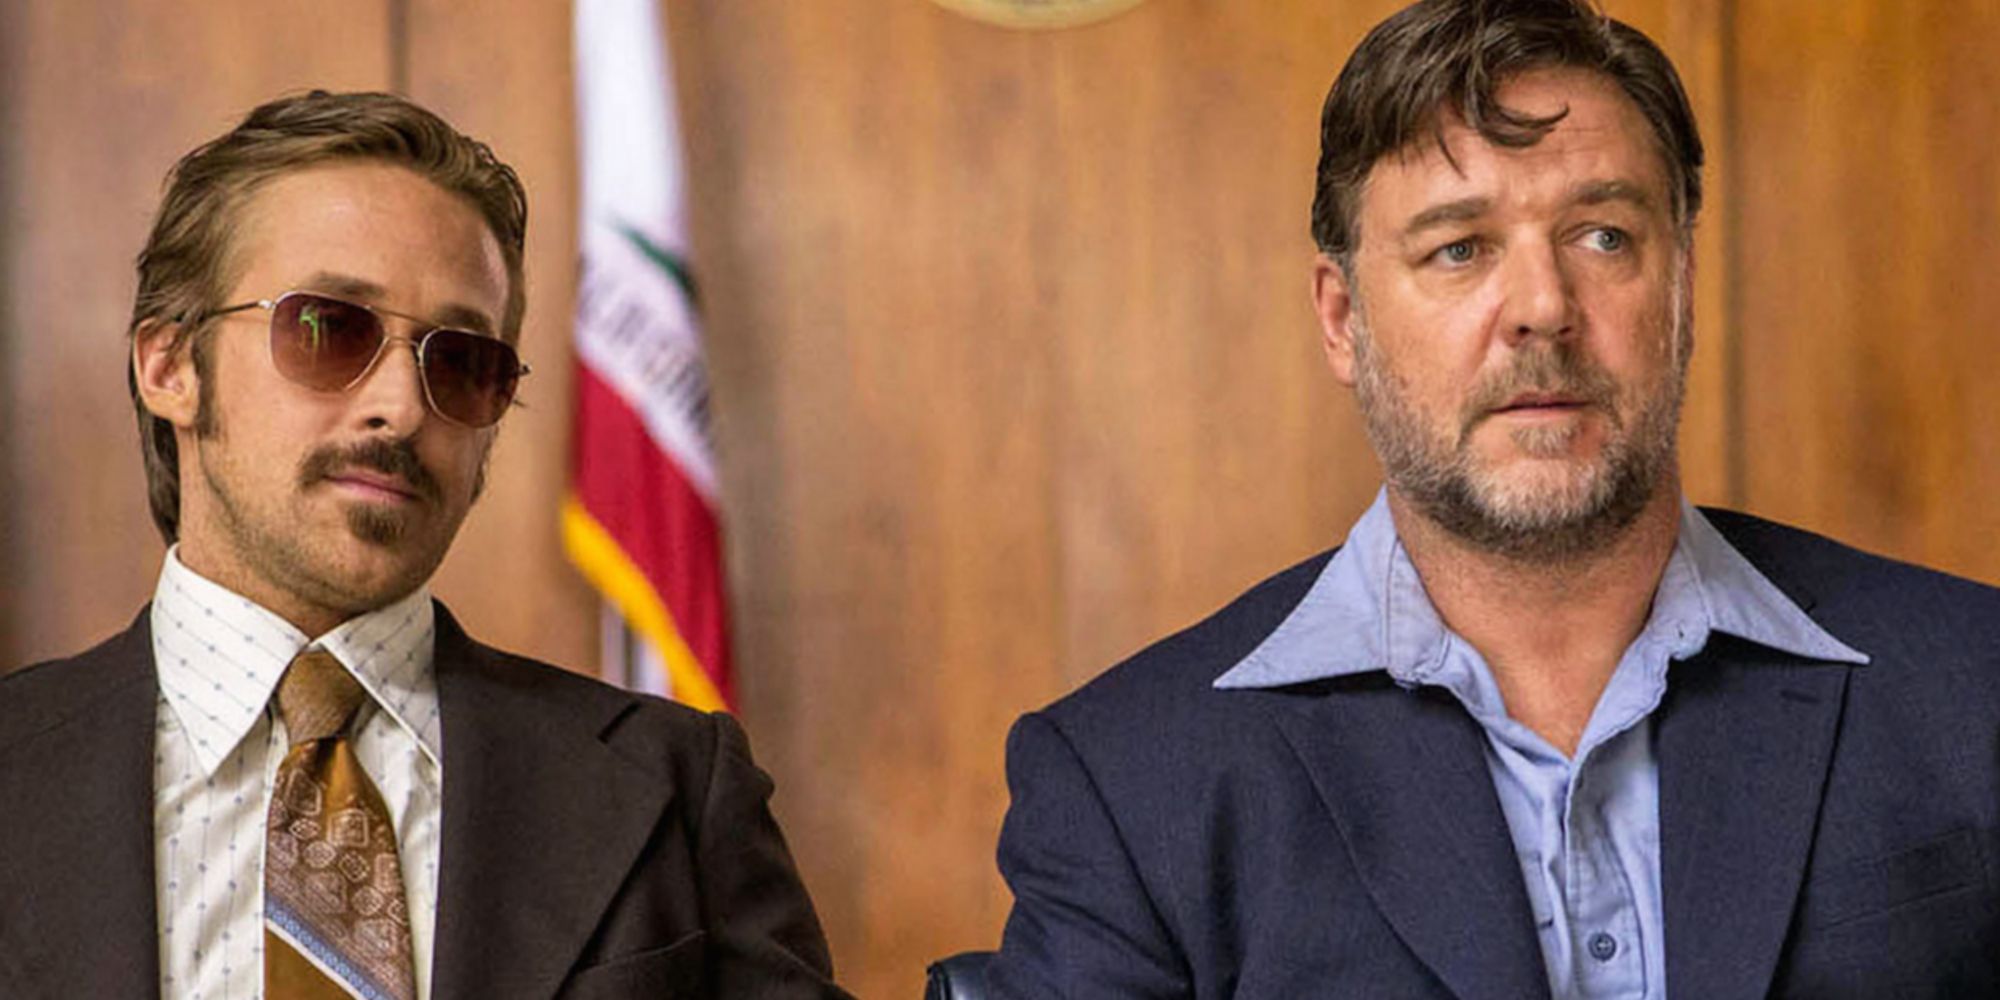  Holland and Jackson looking in the same direction in The Nice Guys.